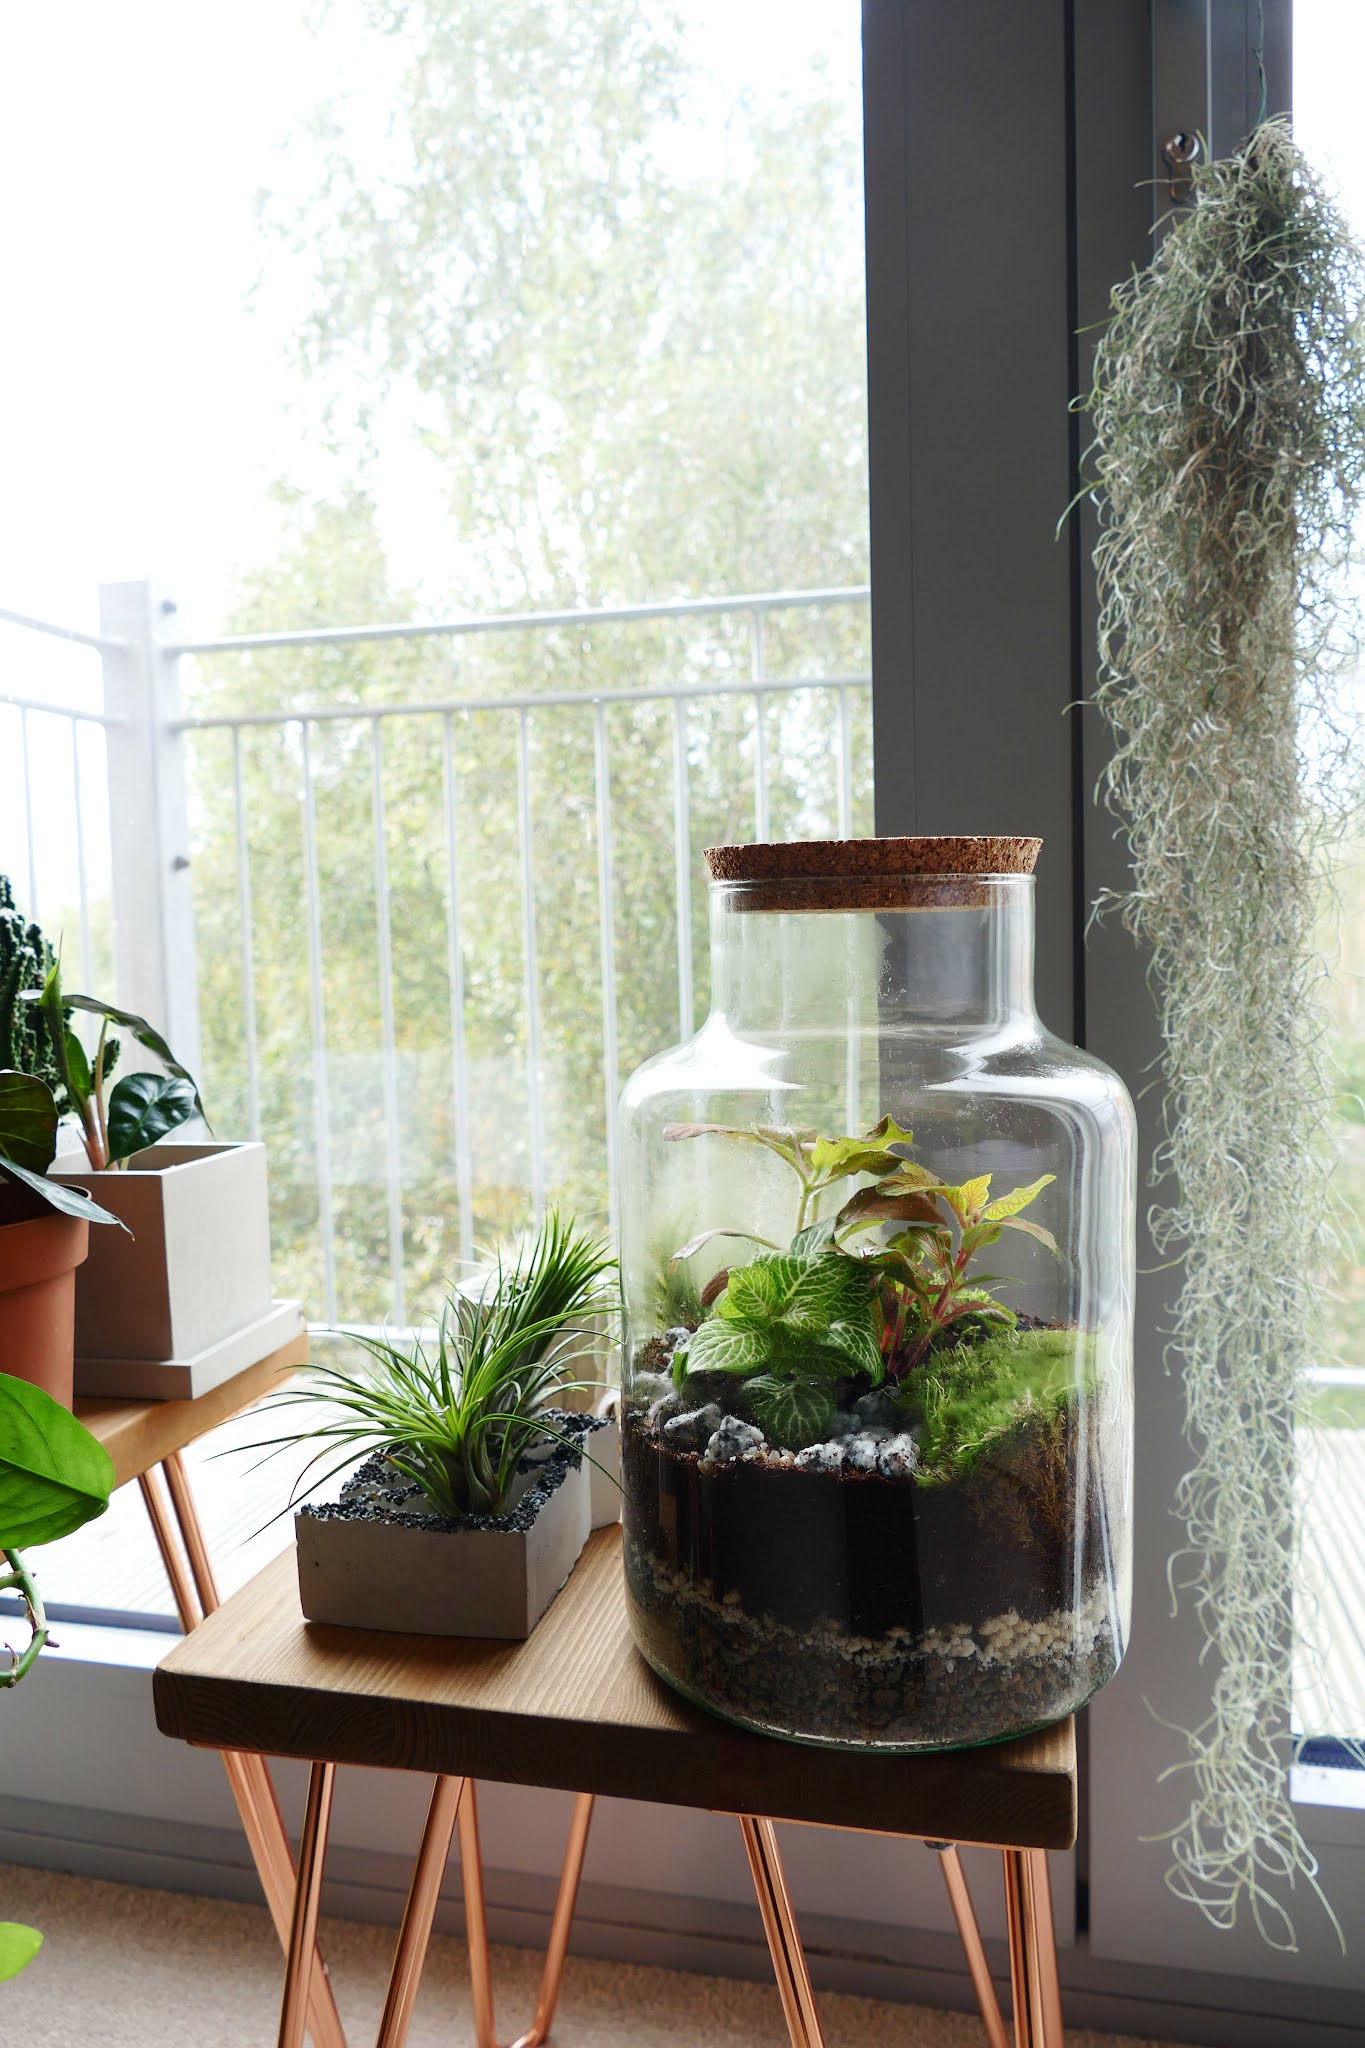 How To Decorate Your House With Terrariums - Underglass Terrariums Review 